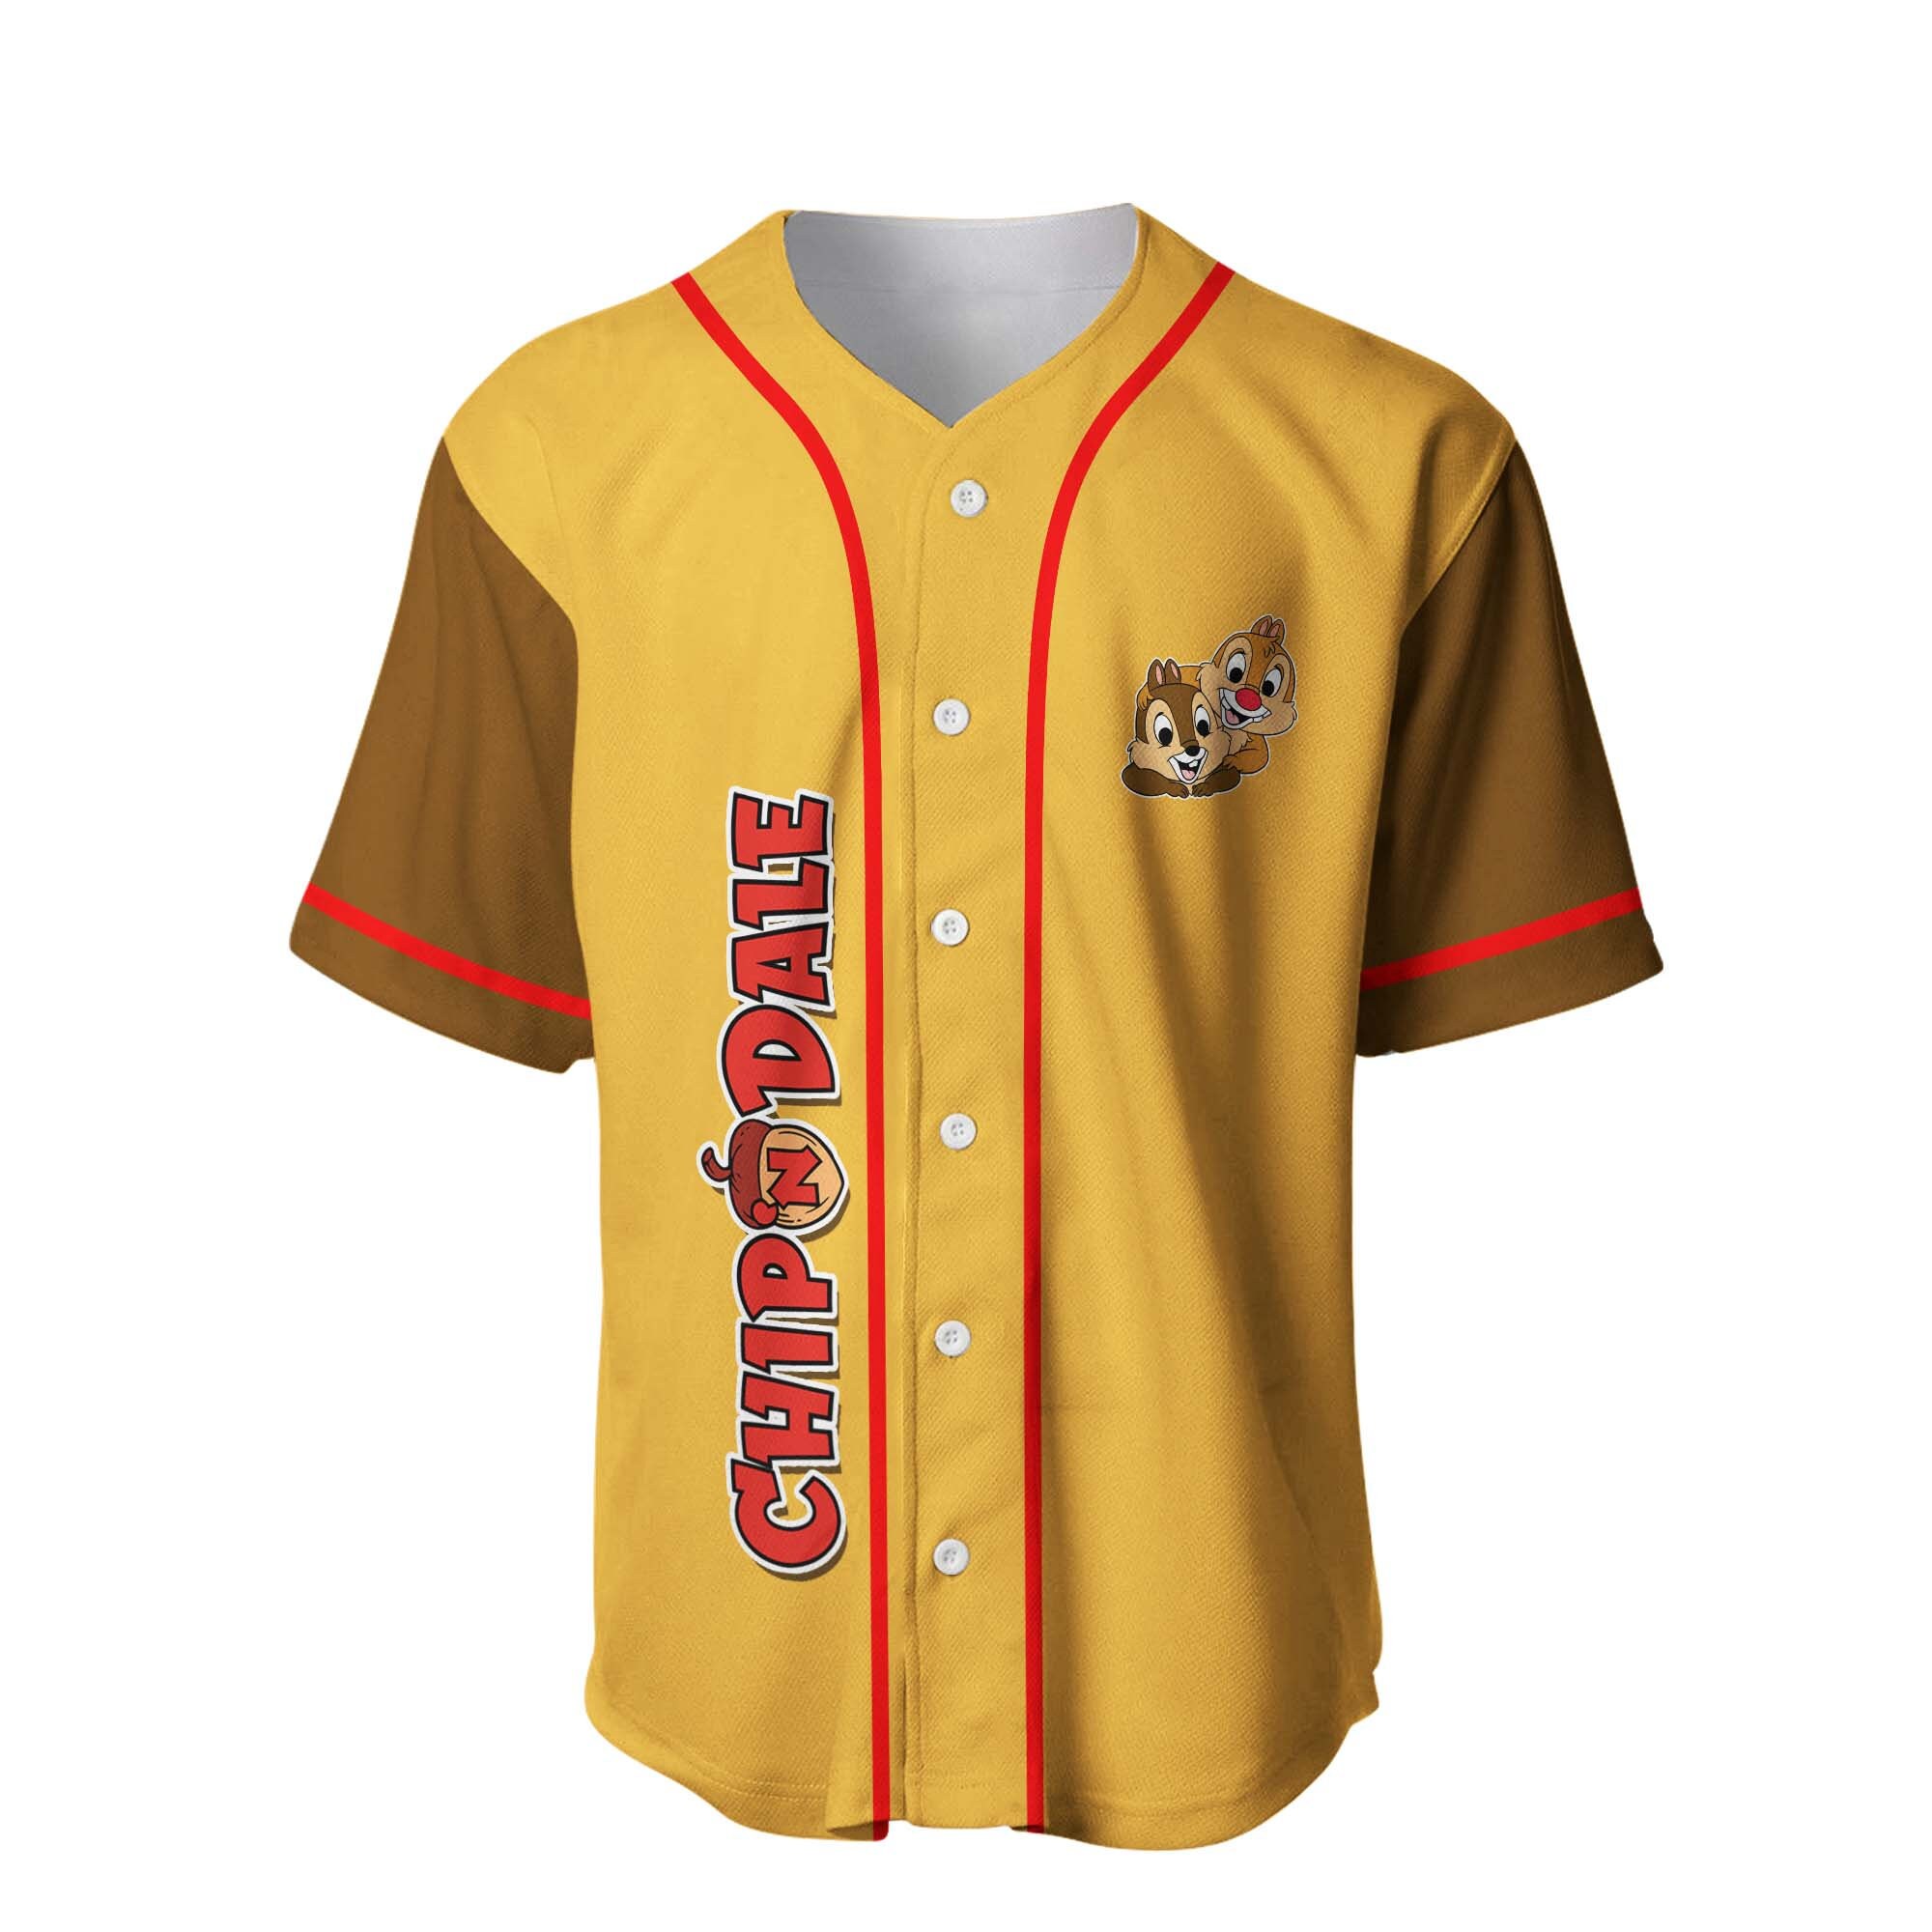 Chip 'n' Dale Gold Brown Red Disney Unisex Cartoon Graphic Casual Outfits Custom Baseball Jersey